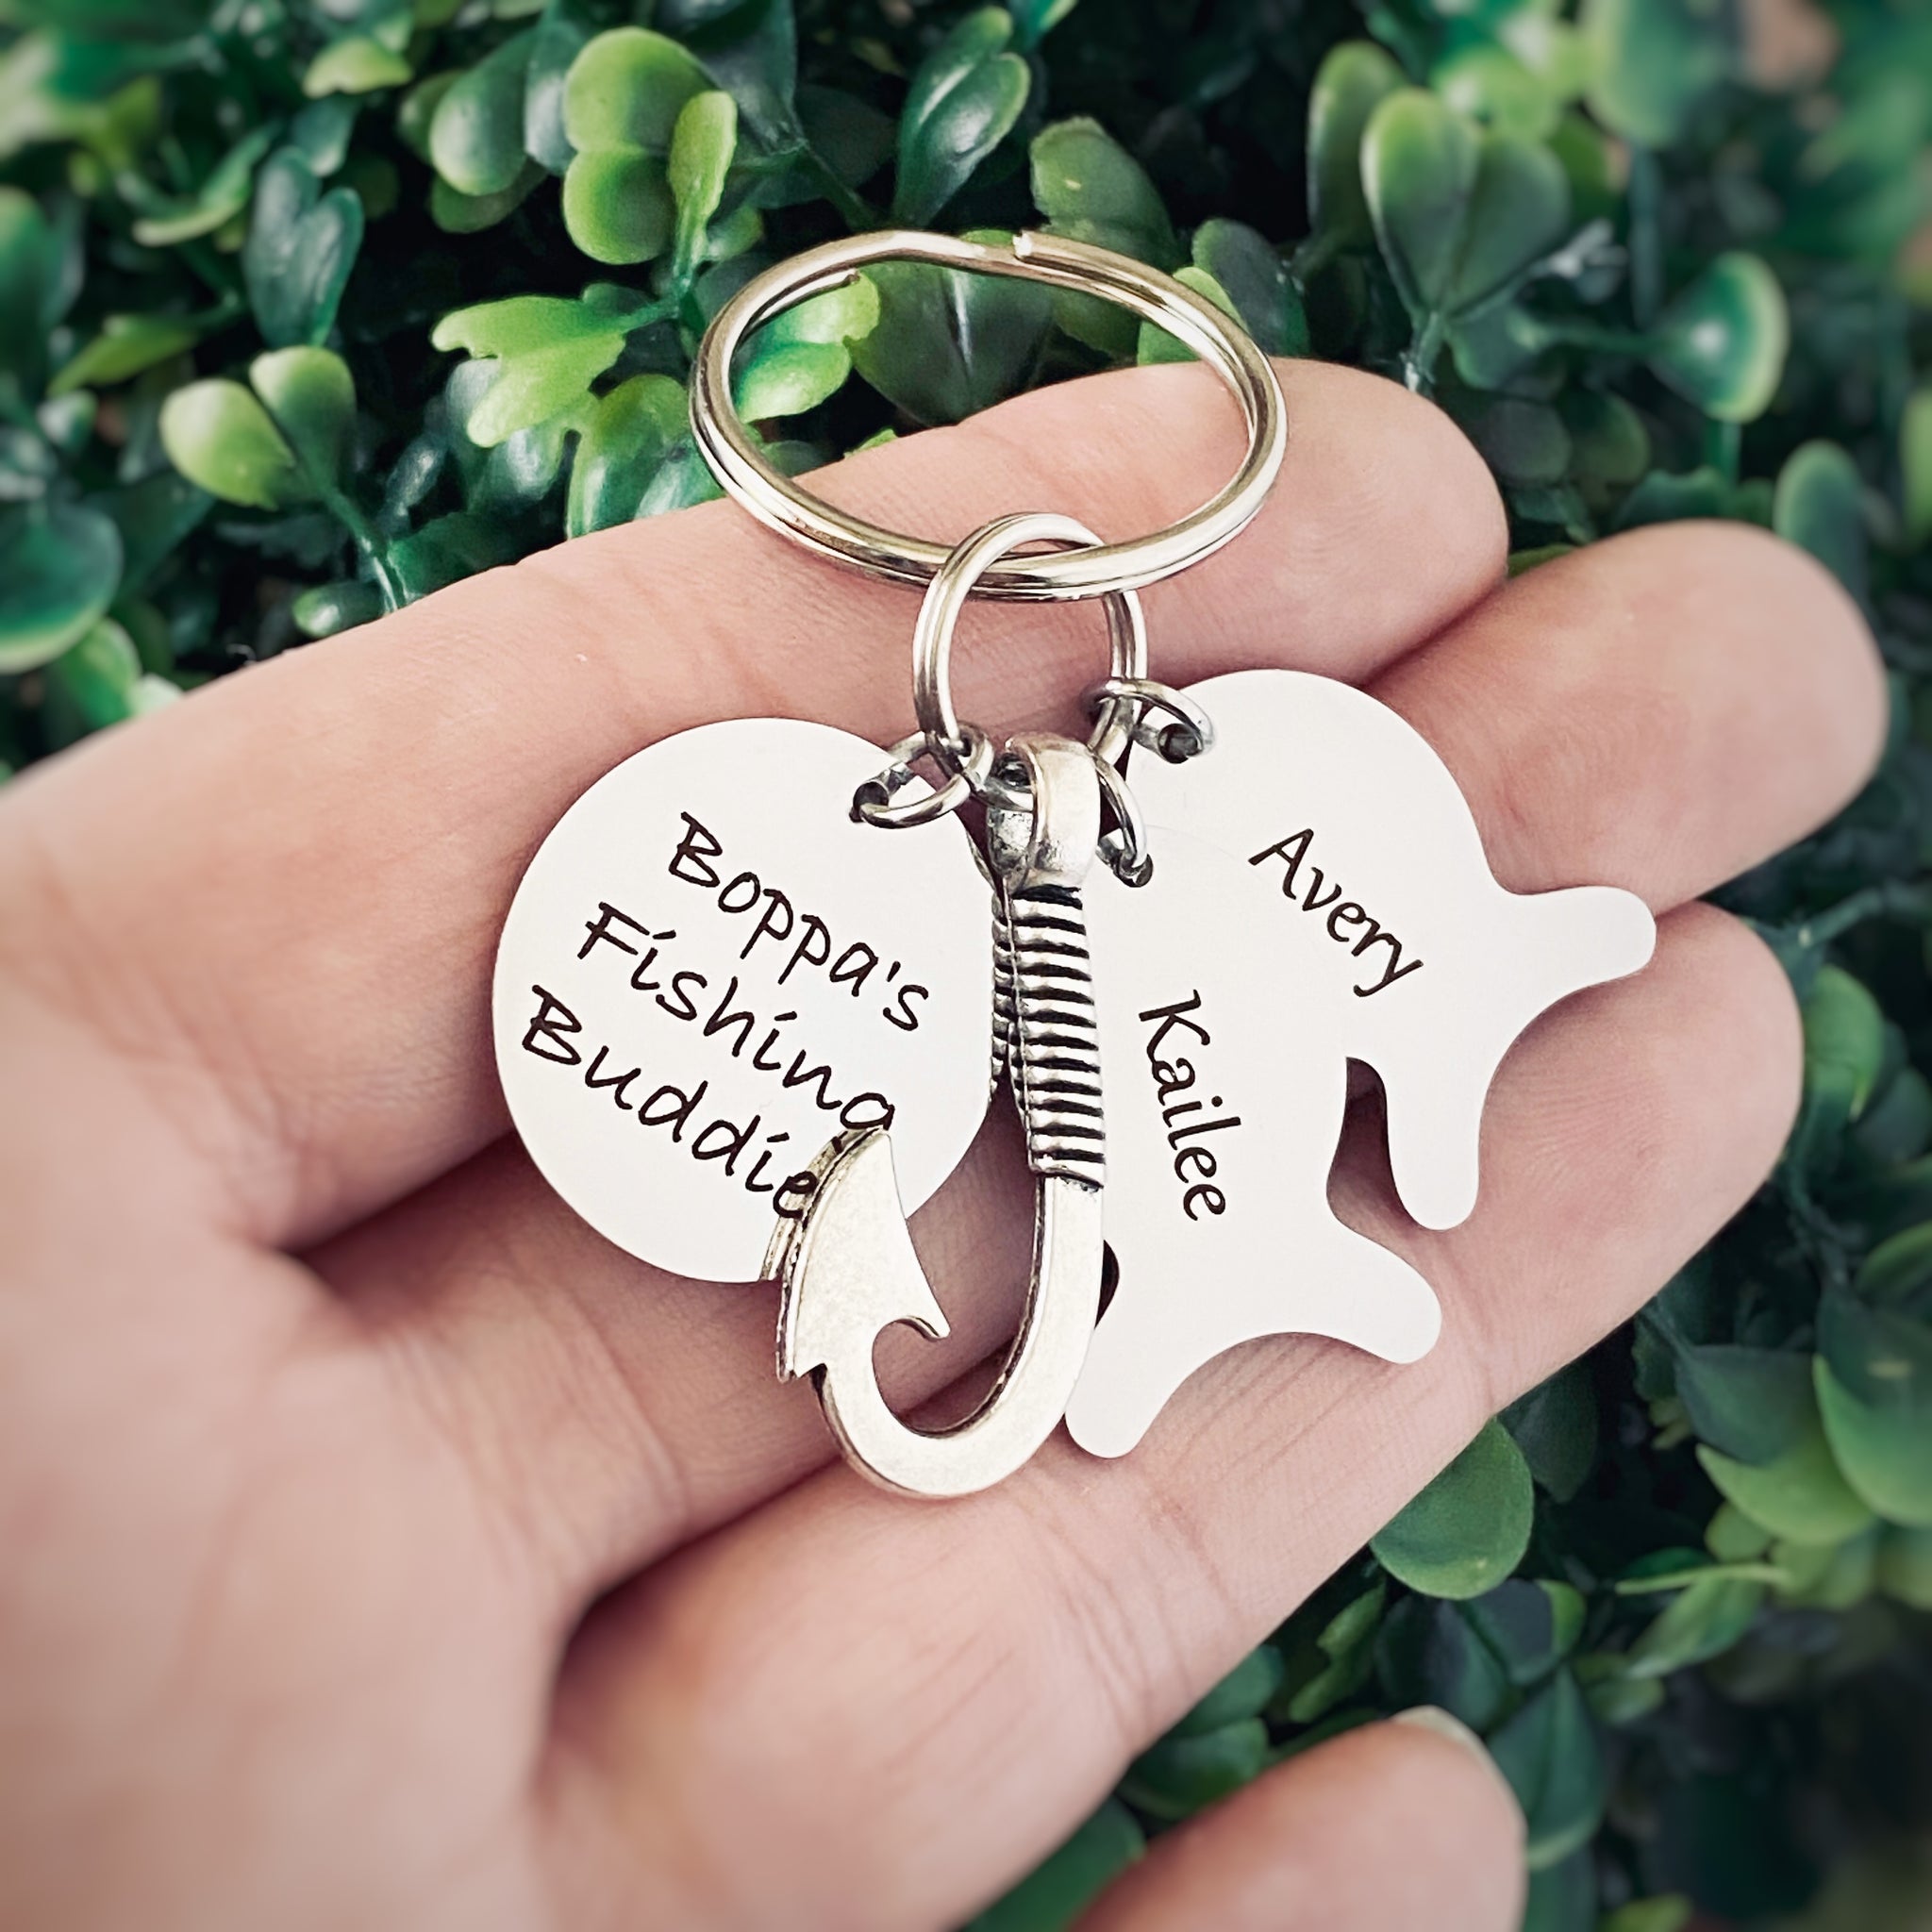 Daddy's Fishing Buddy Keychain with Fish Name Tags